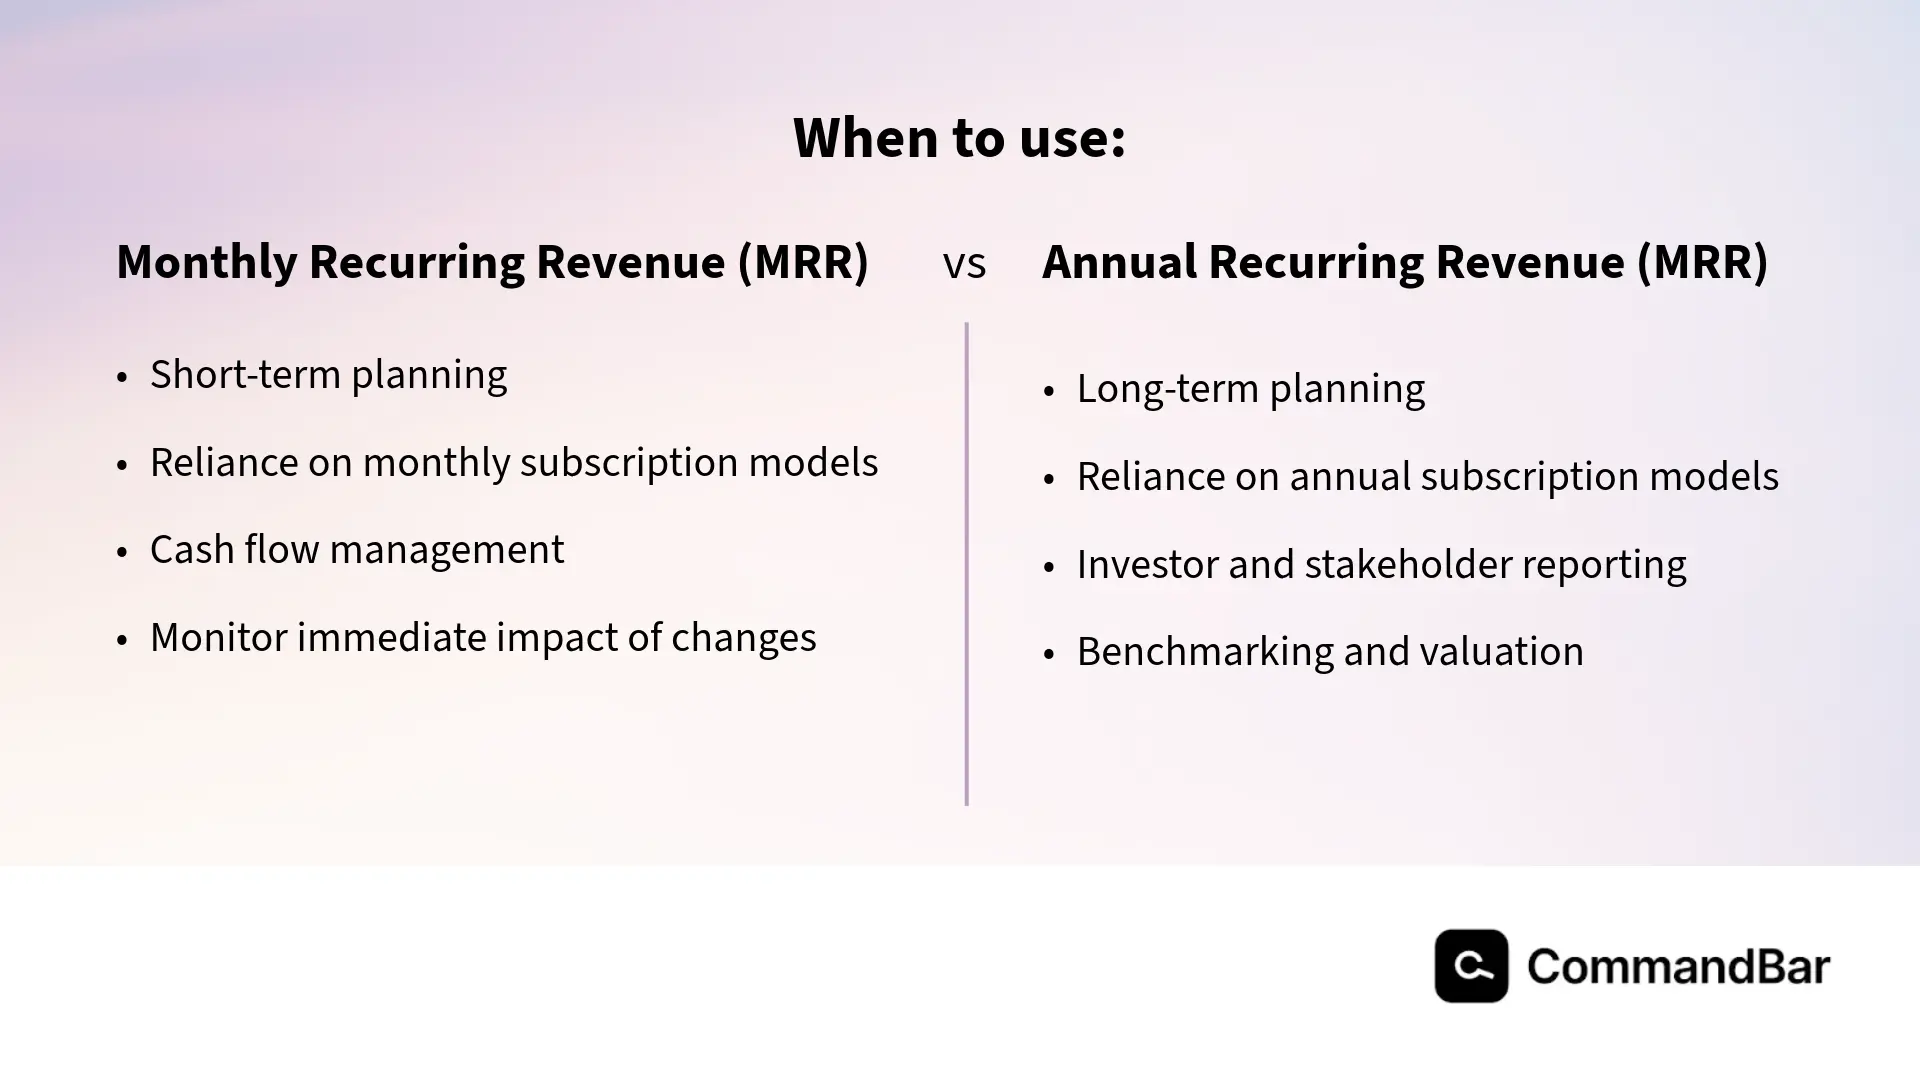 When to use monthly recurring revenue (MRR) or annual recurring revenue (ARR) for your revenue growth rate